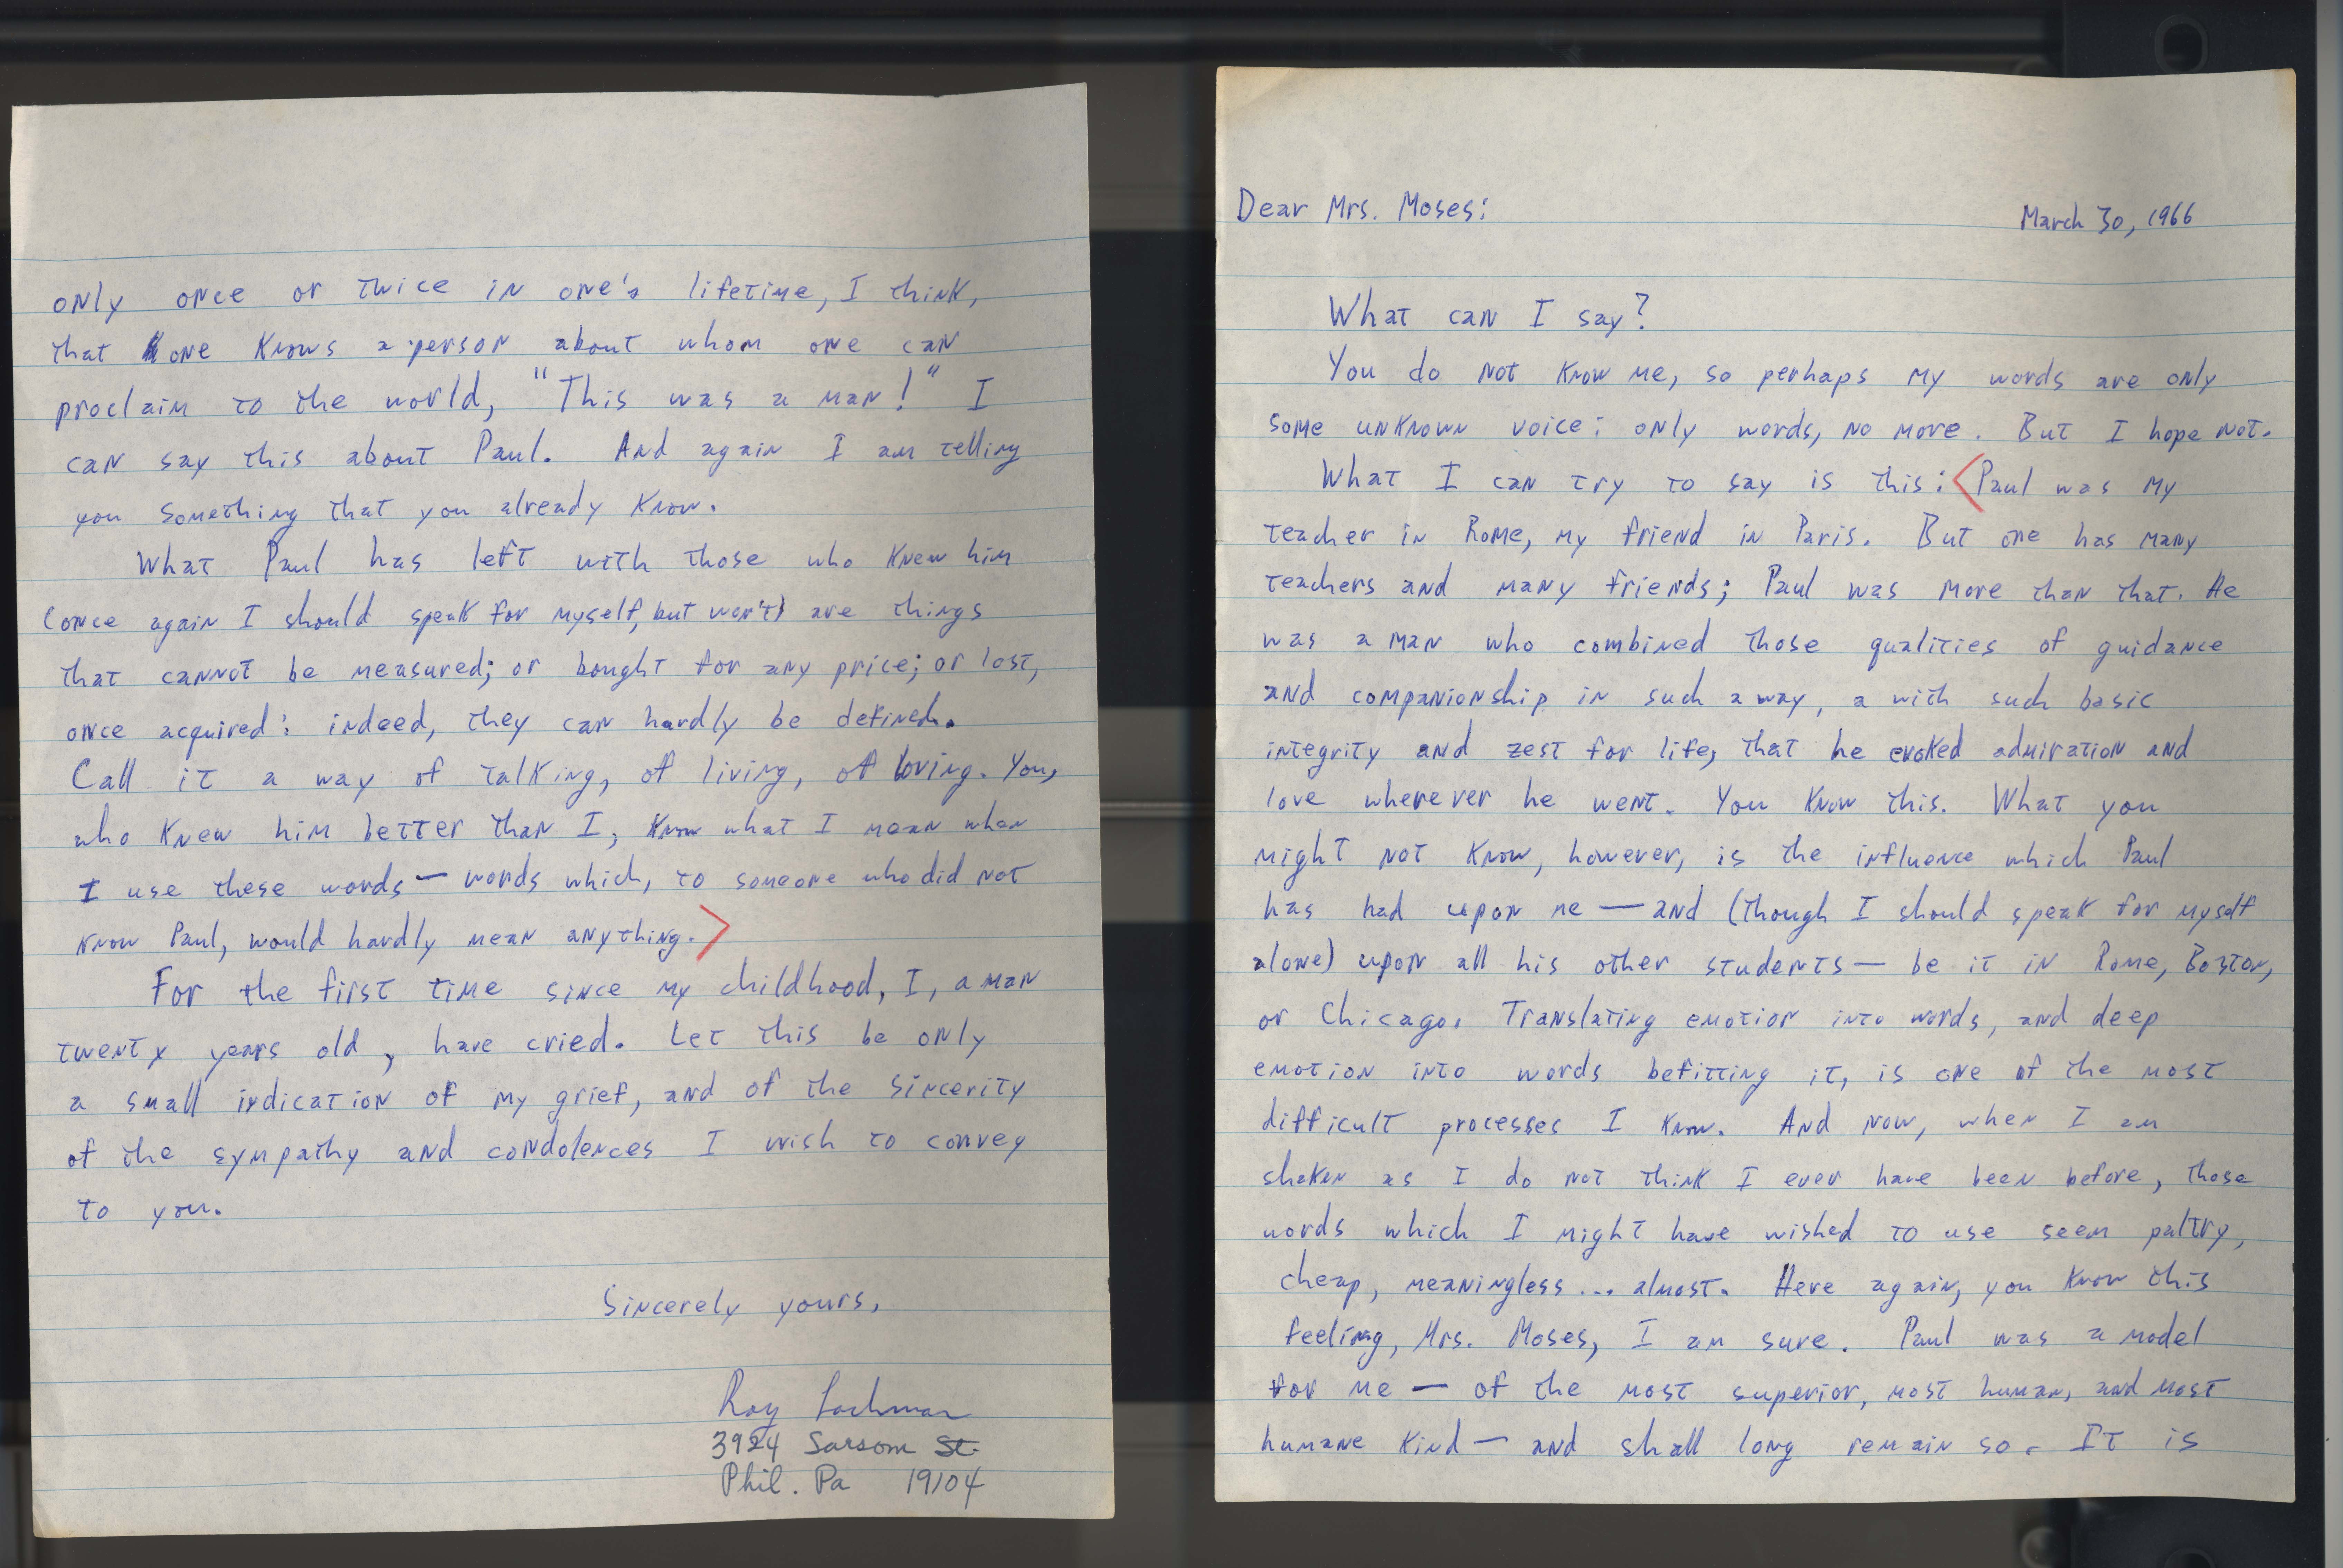 Condolence letter from Ray Lachman to Alice Moses, 1966